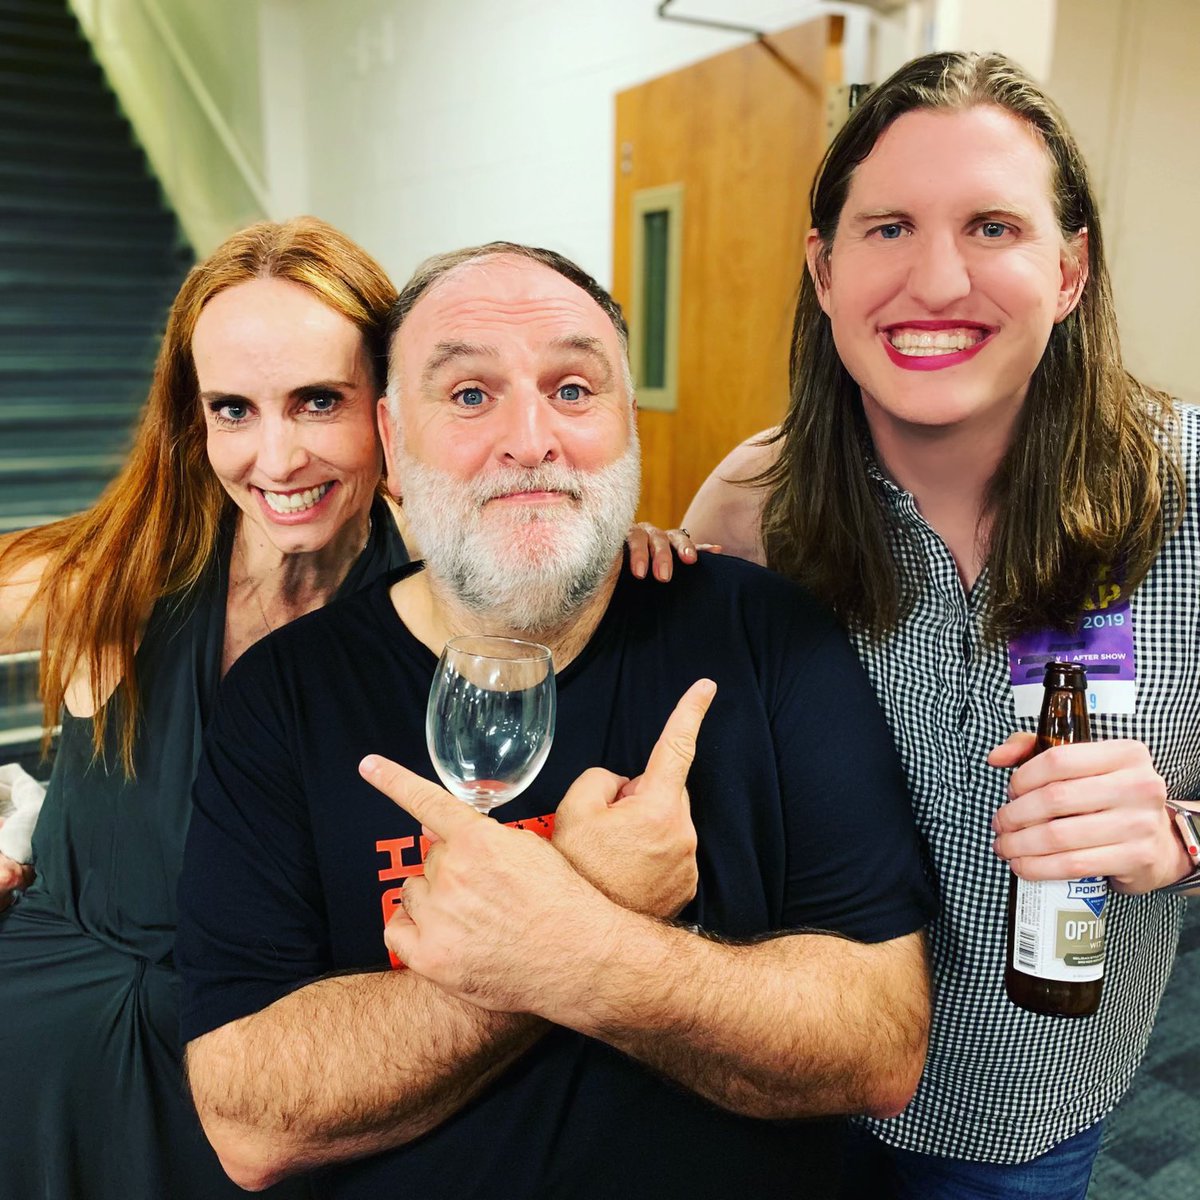 Today seems like a good day to post a photo of me with @chefjoseandres and @cmclymer One of the greatest gifts of what I do is getting to spend time with great humans, like them, who inspire me.